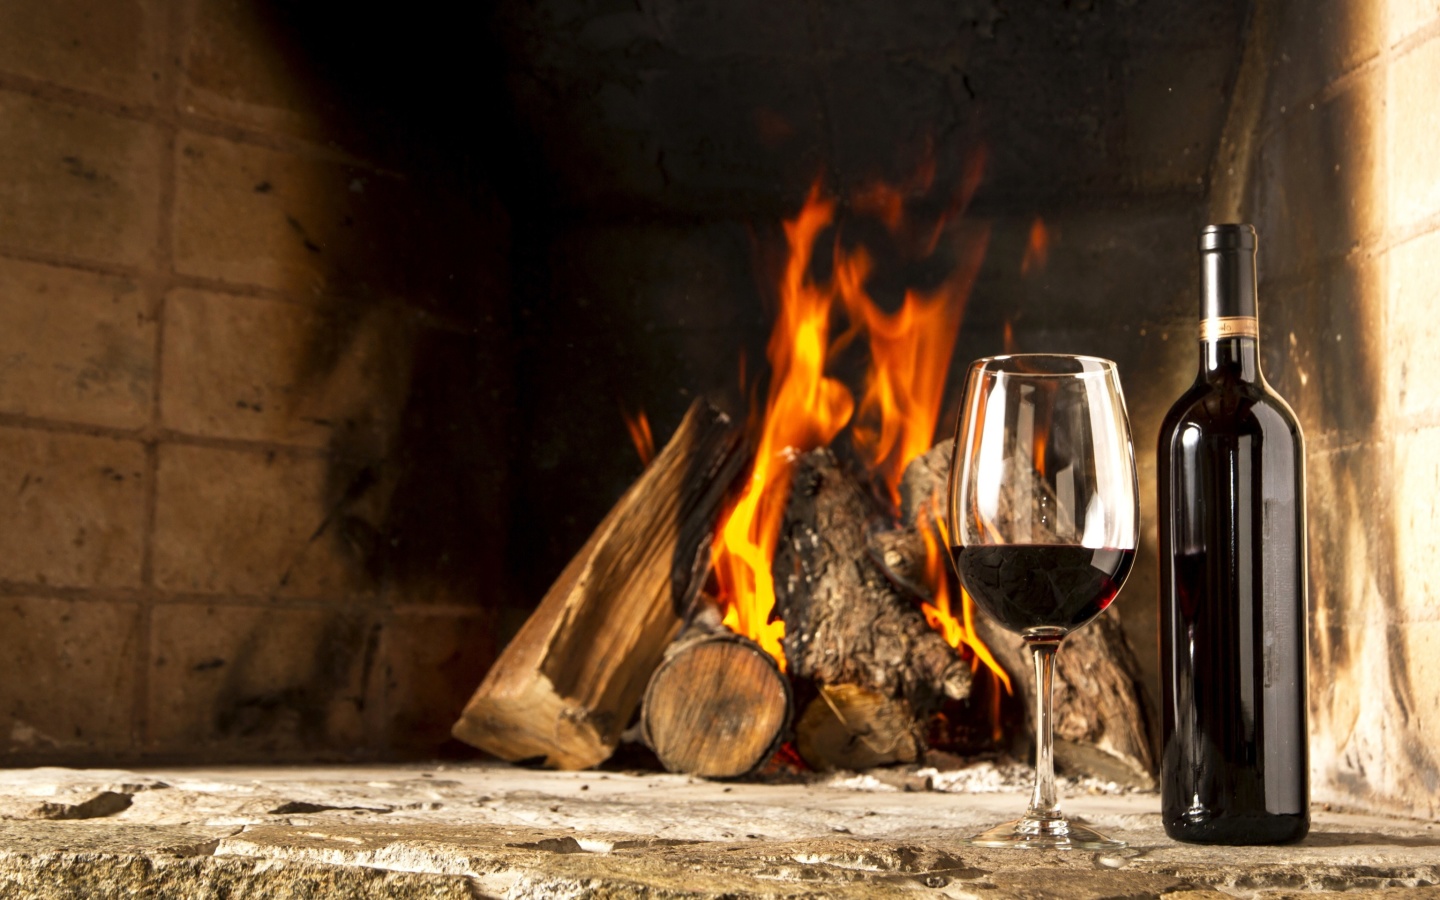 Das Wine and fireplace Wallpaper 1440x900